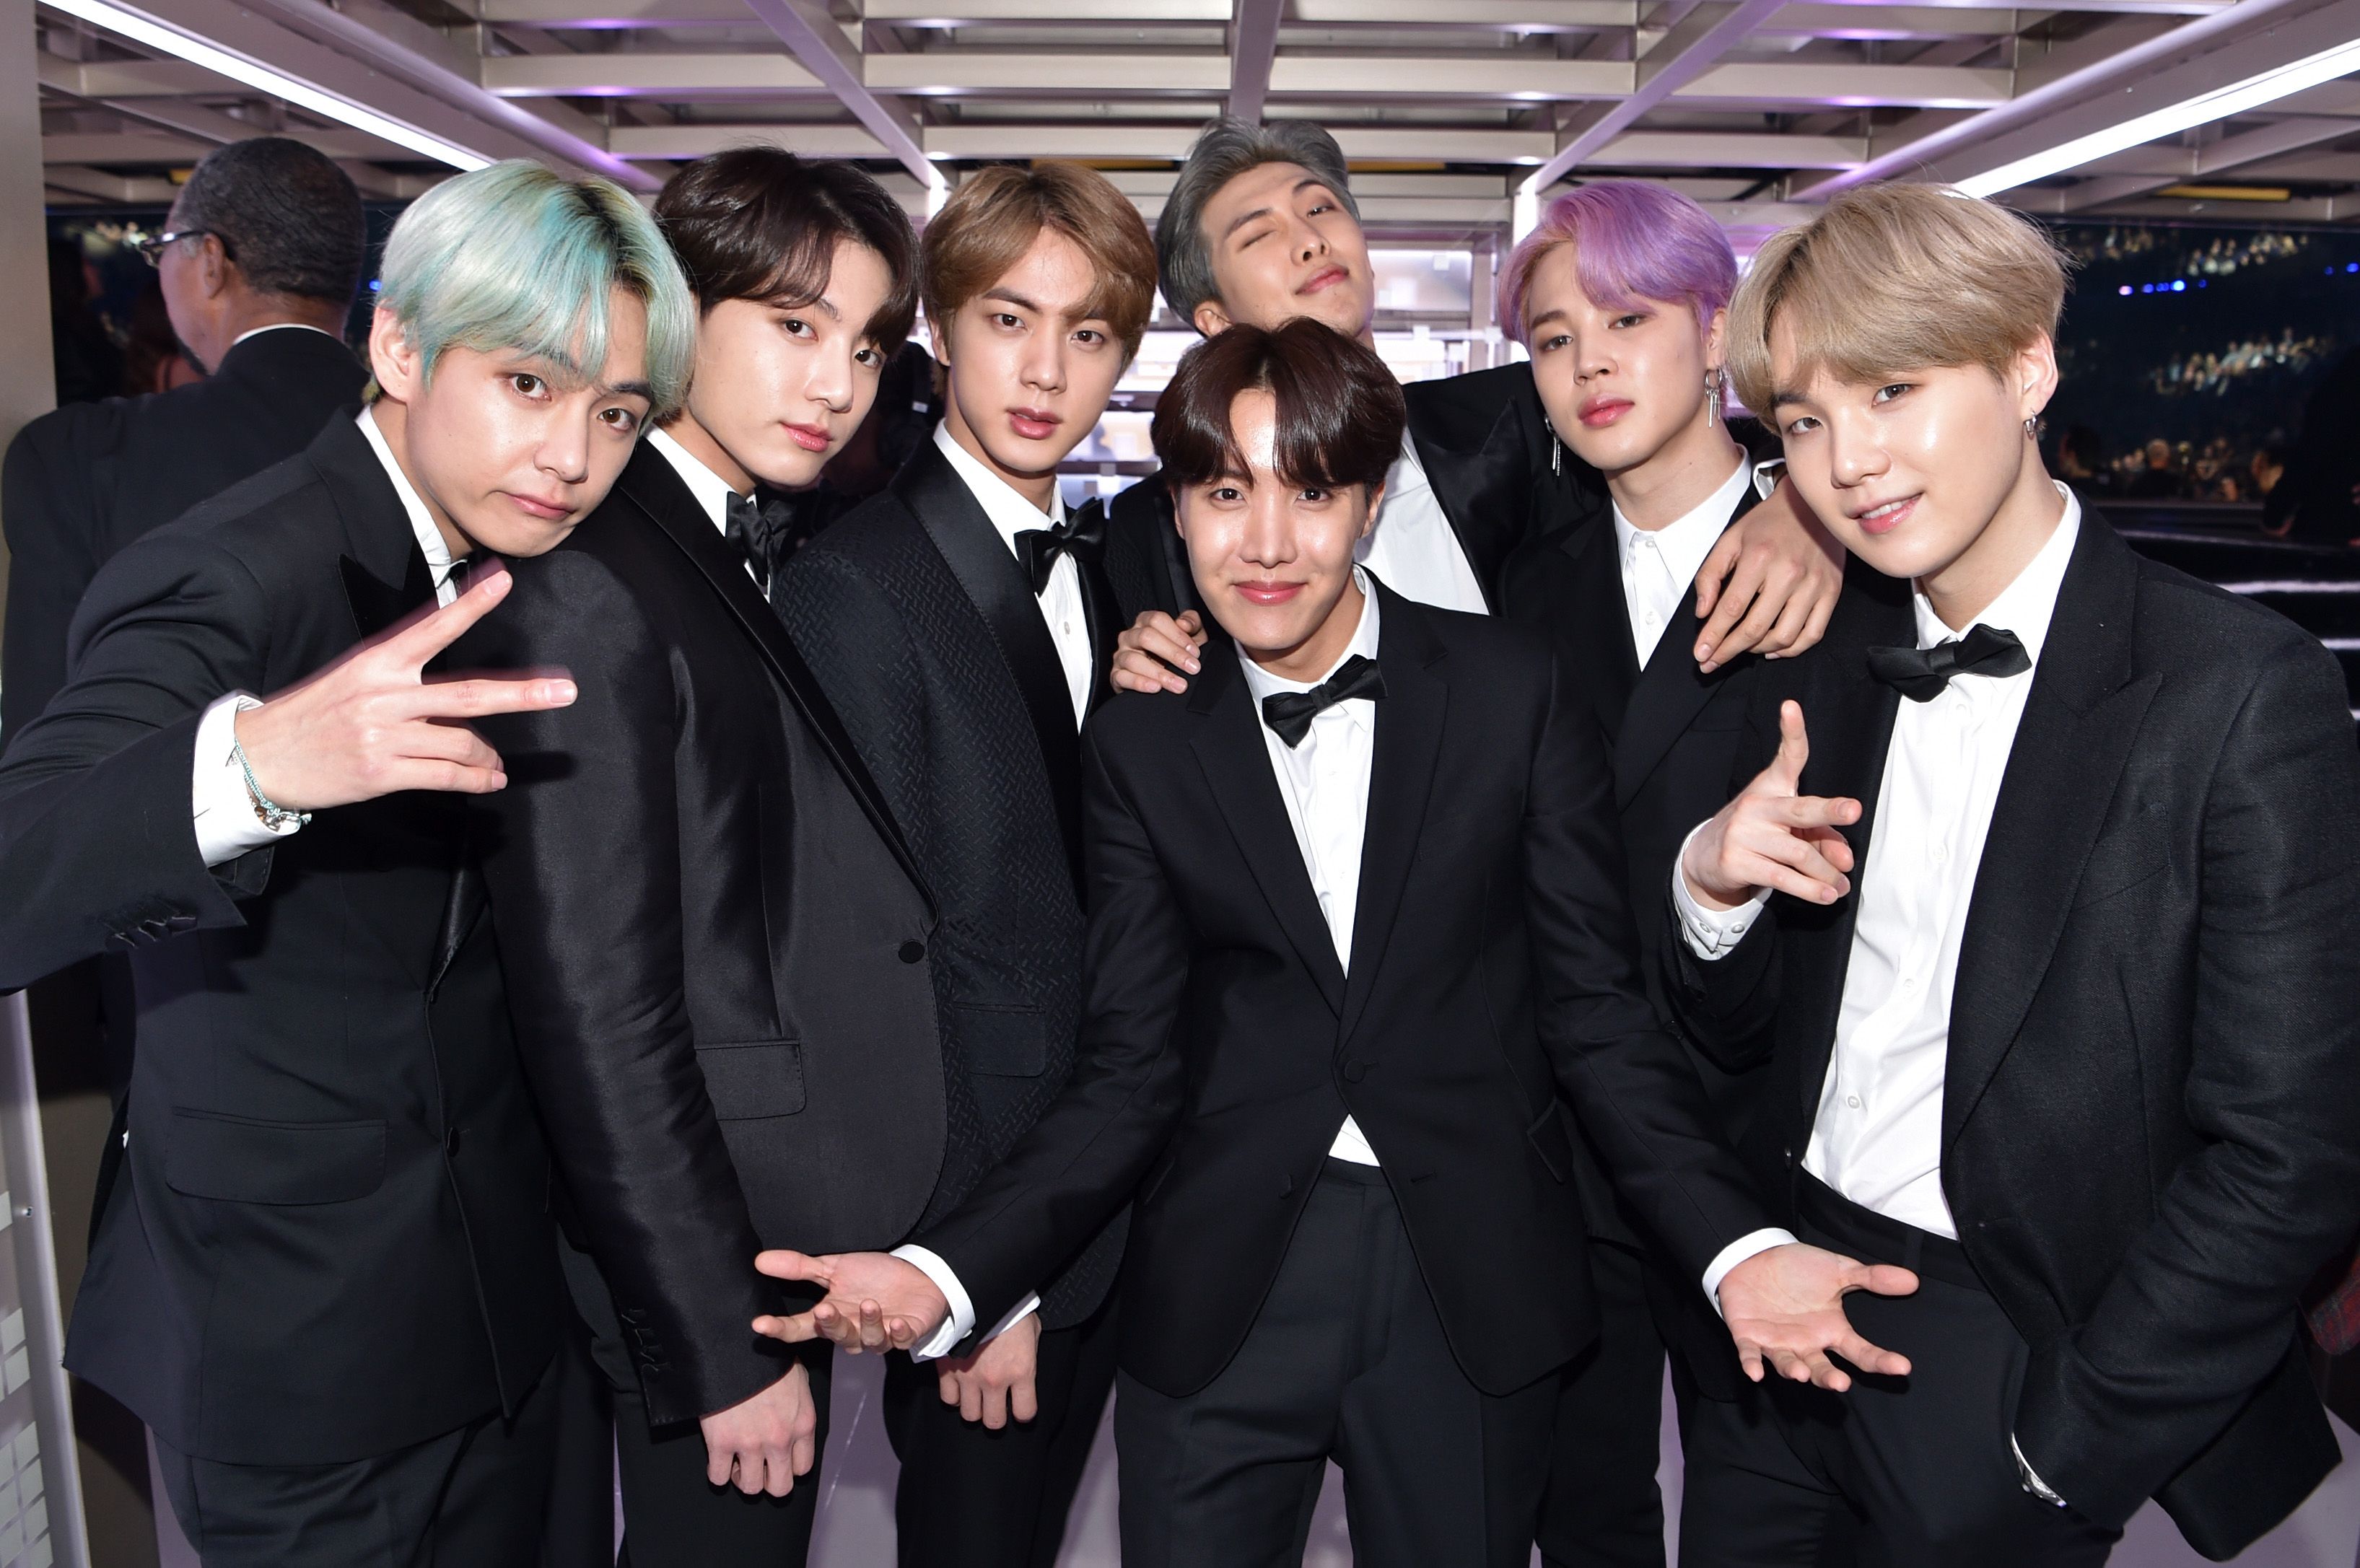 south-korean-boy-band-bts-backstage-during-the-61st-annual-news-photo-1097661412-1565570481.jpg